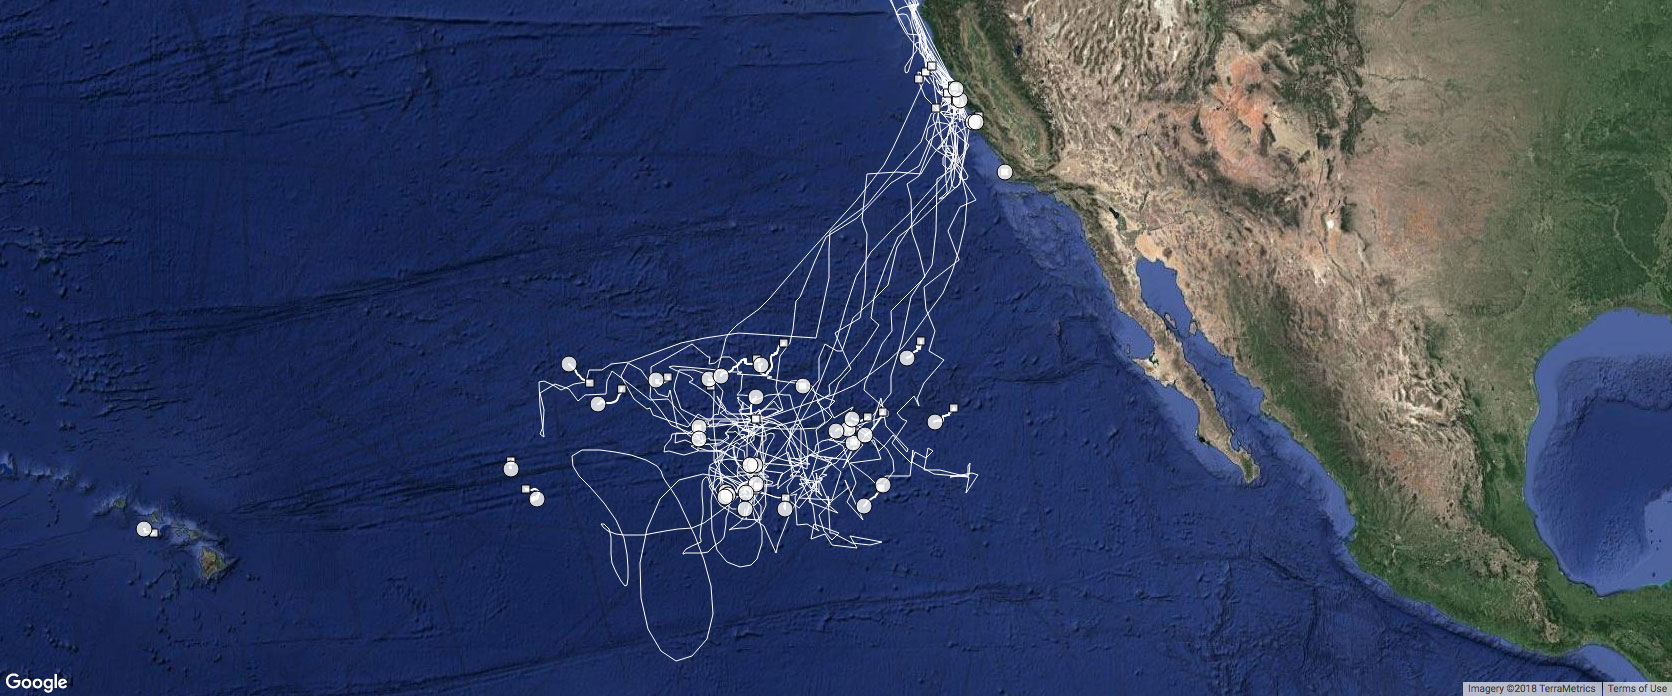 map of white shark migration patterns in pacific ocean